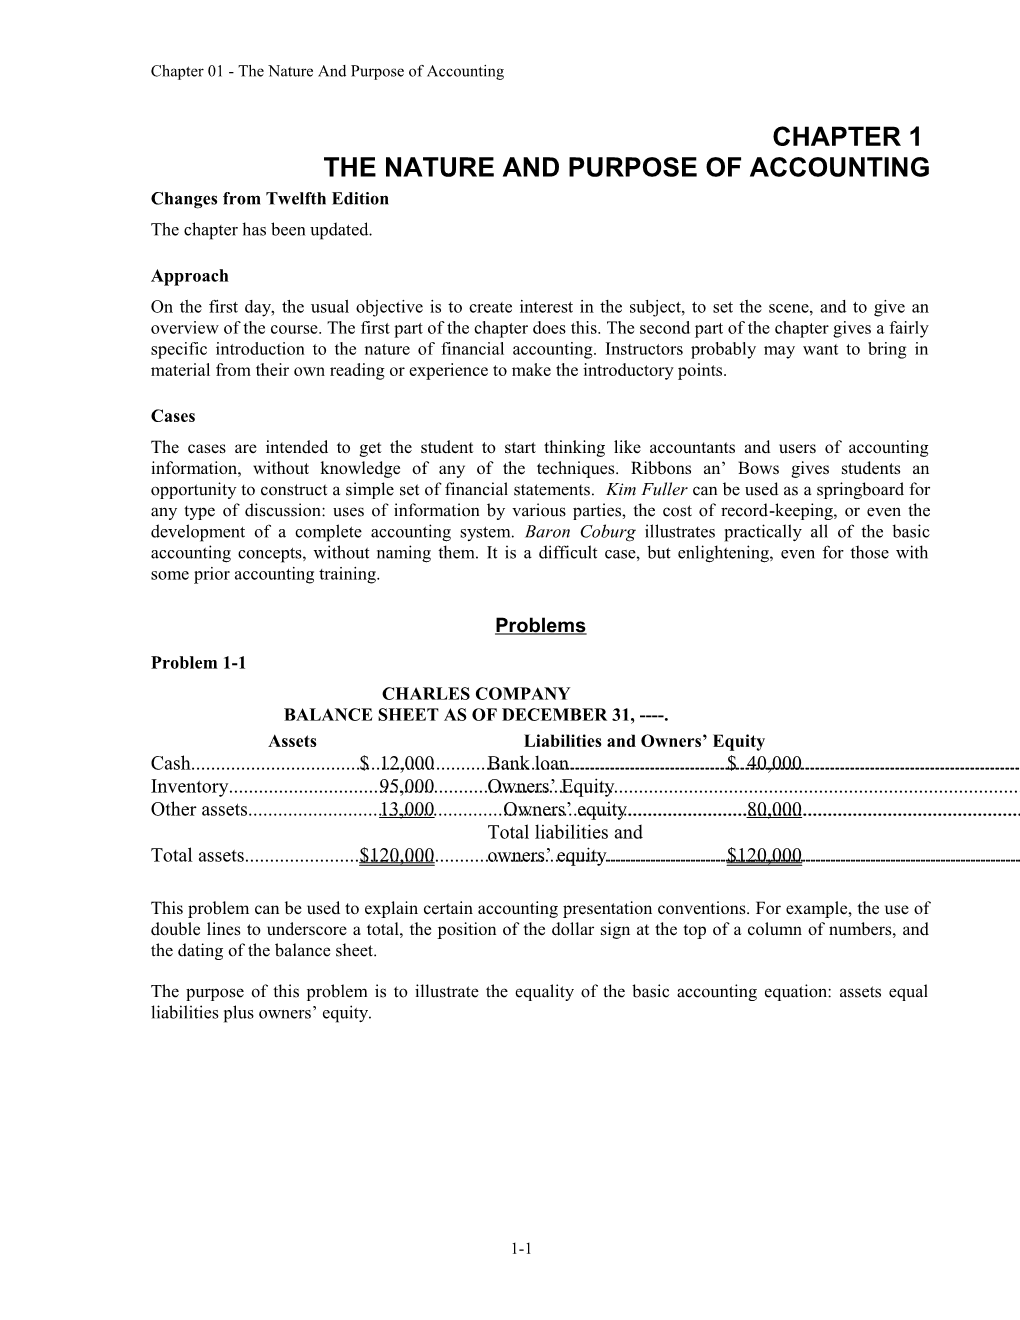 Chapter 01 - the Nature and Purpose of Accounting